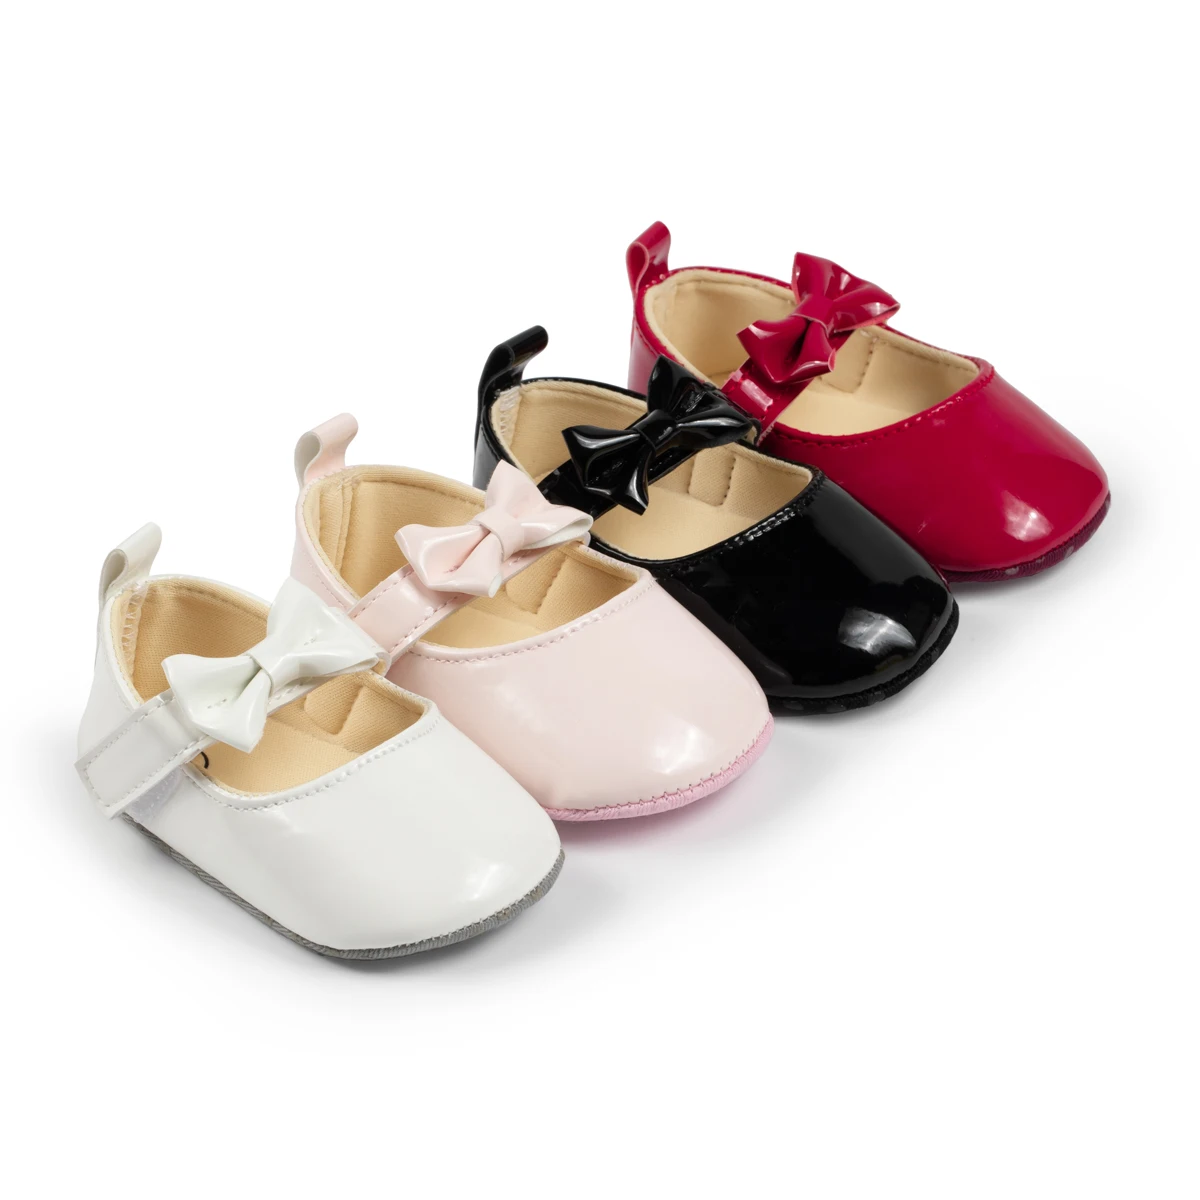 

New Arrival Pu Leather Bowknot Dress Shoes 0-18 Months Party Baby Girl Shoes For Babies